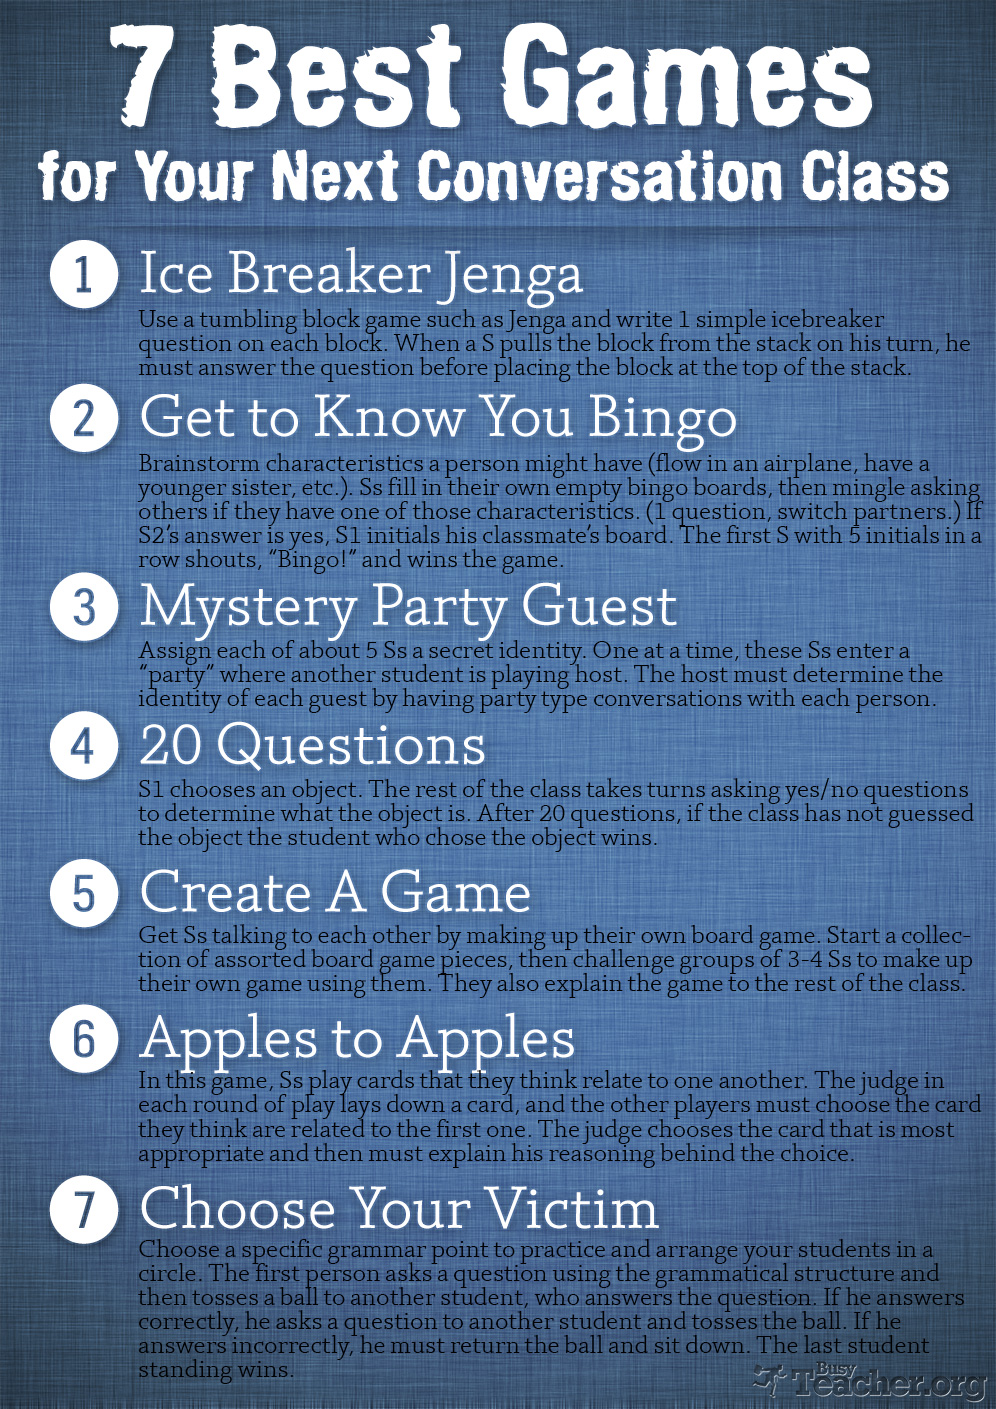 7 Best Games for Your Next Conversation Class: Poster